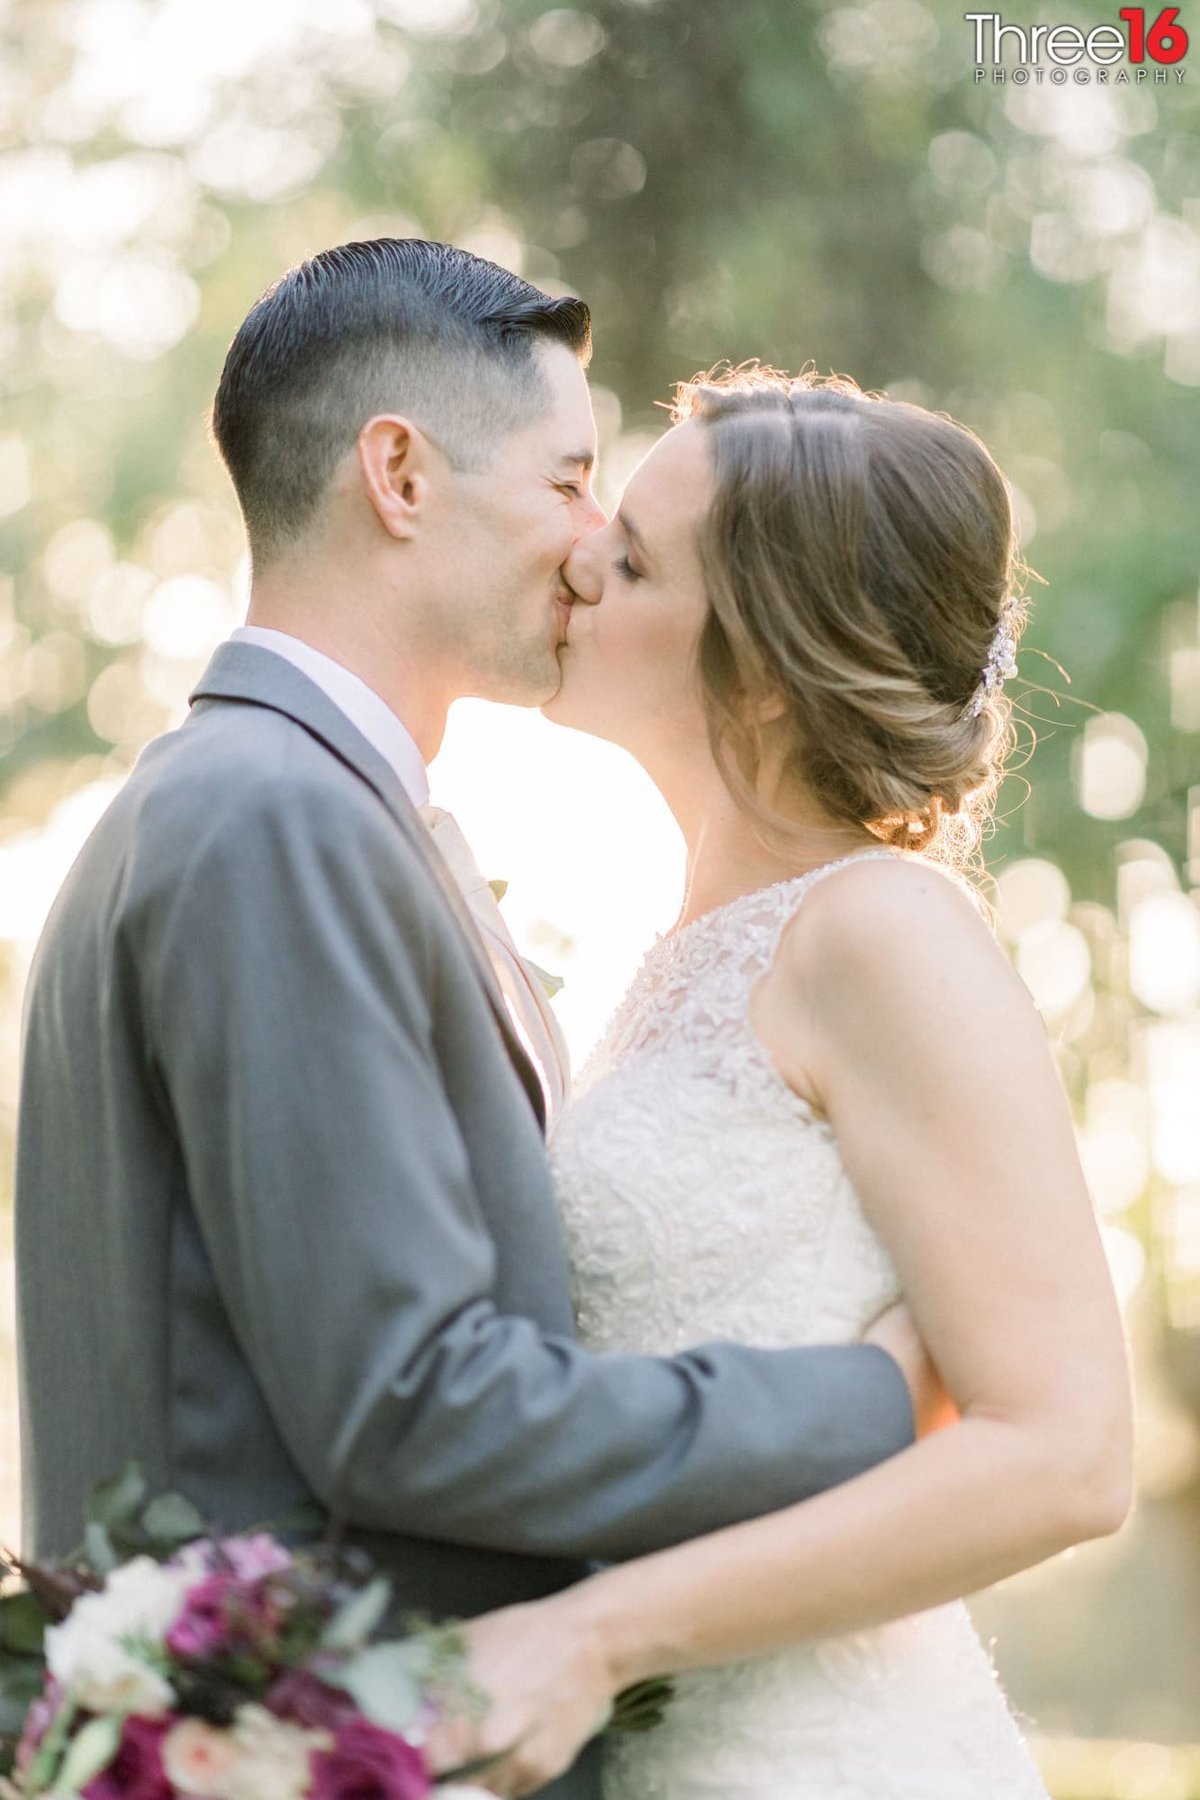 Bride and Groom share a romantic kiss